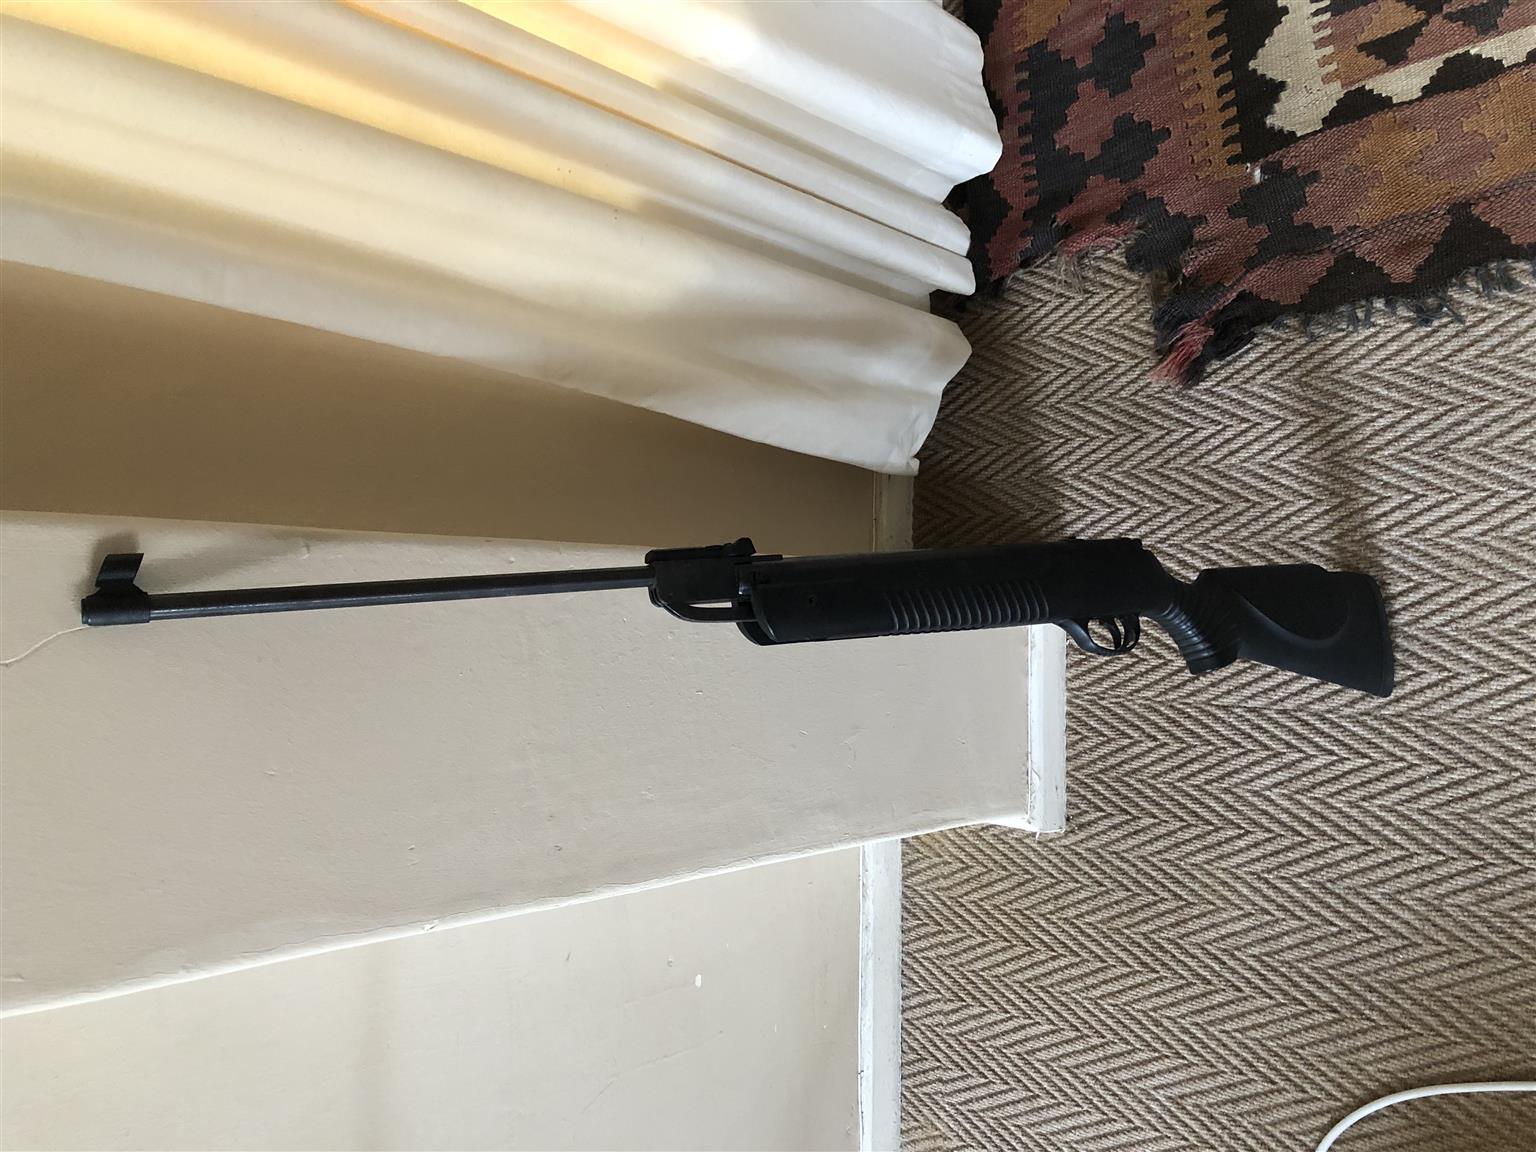 Hanson Mob 80 air rifle as new with pellets